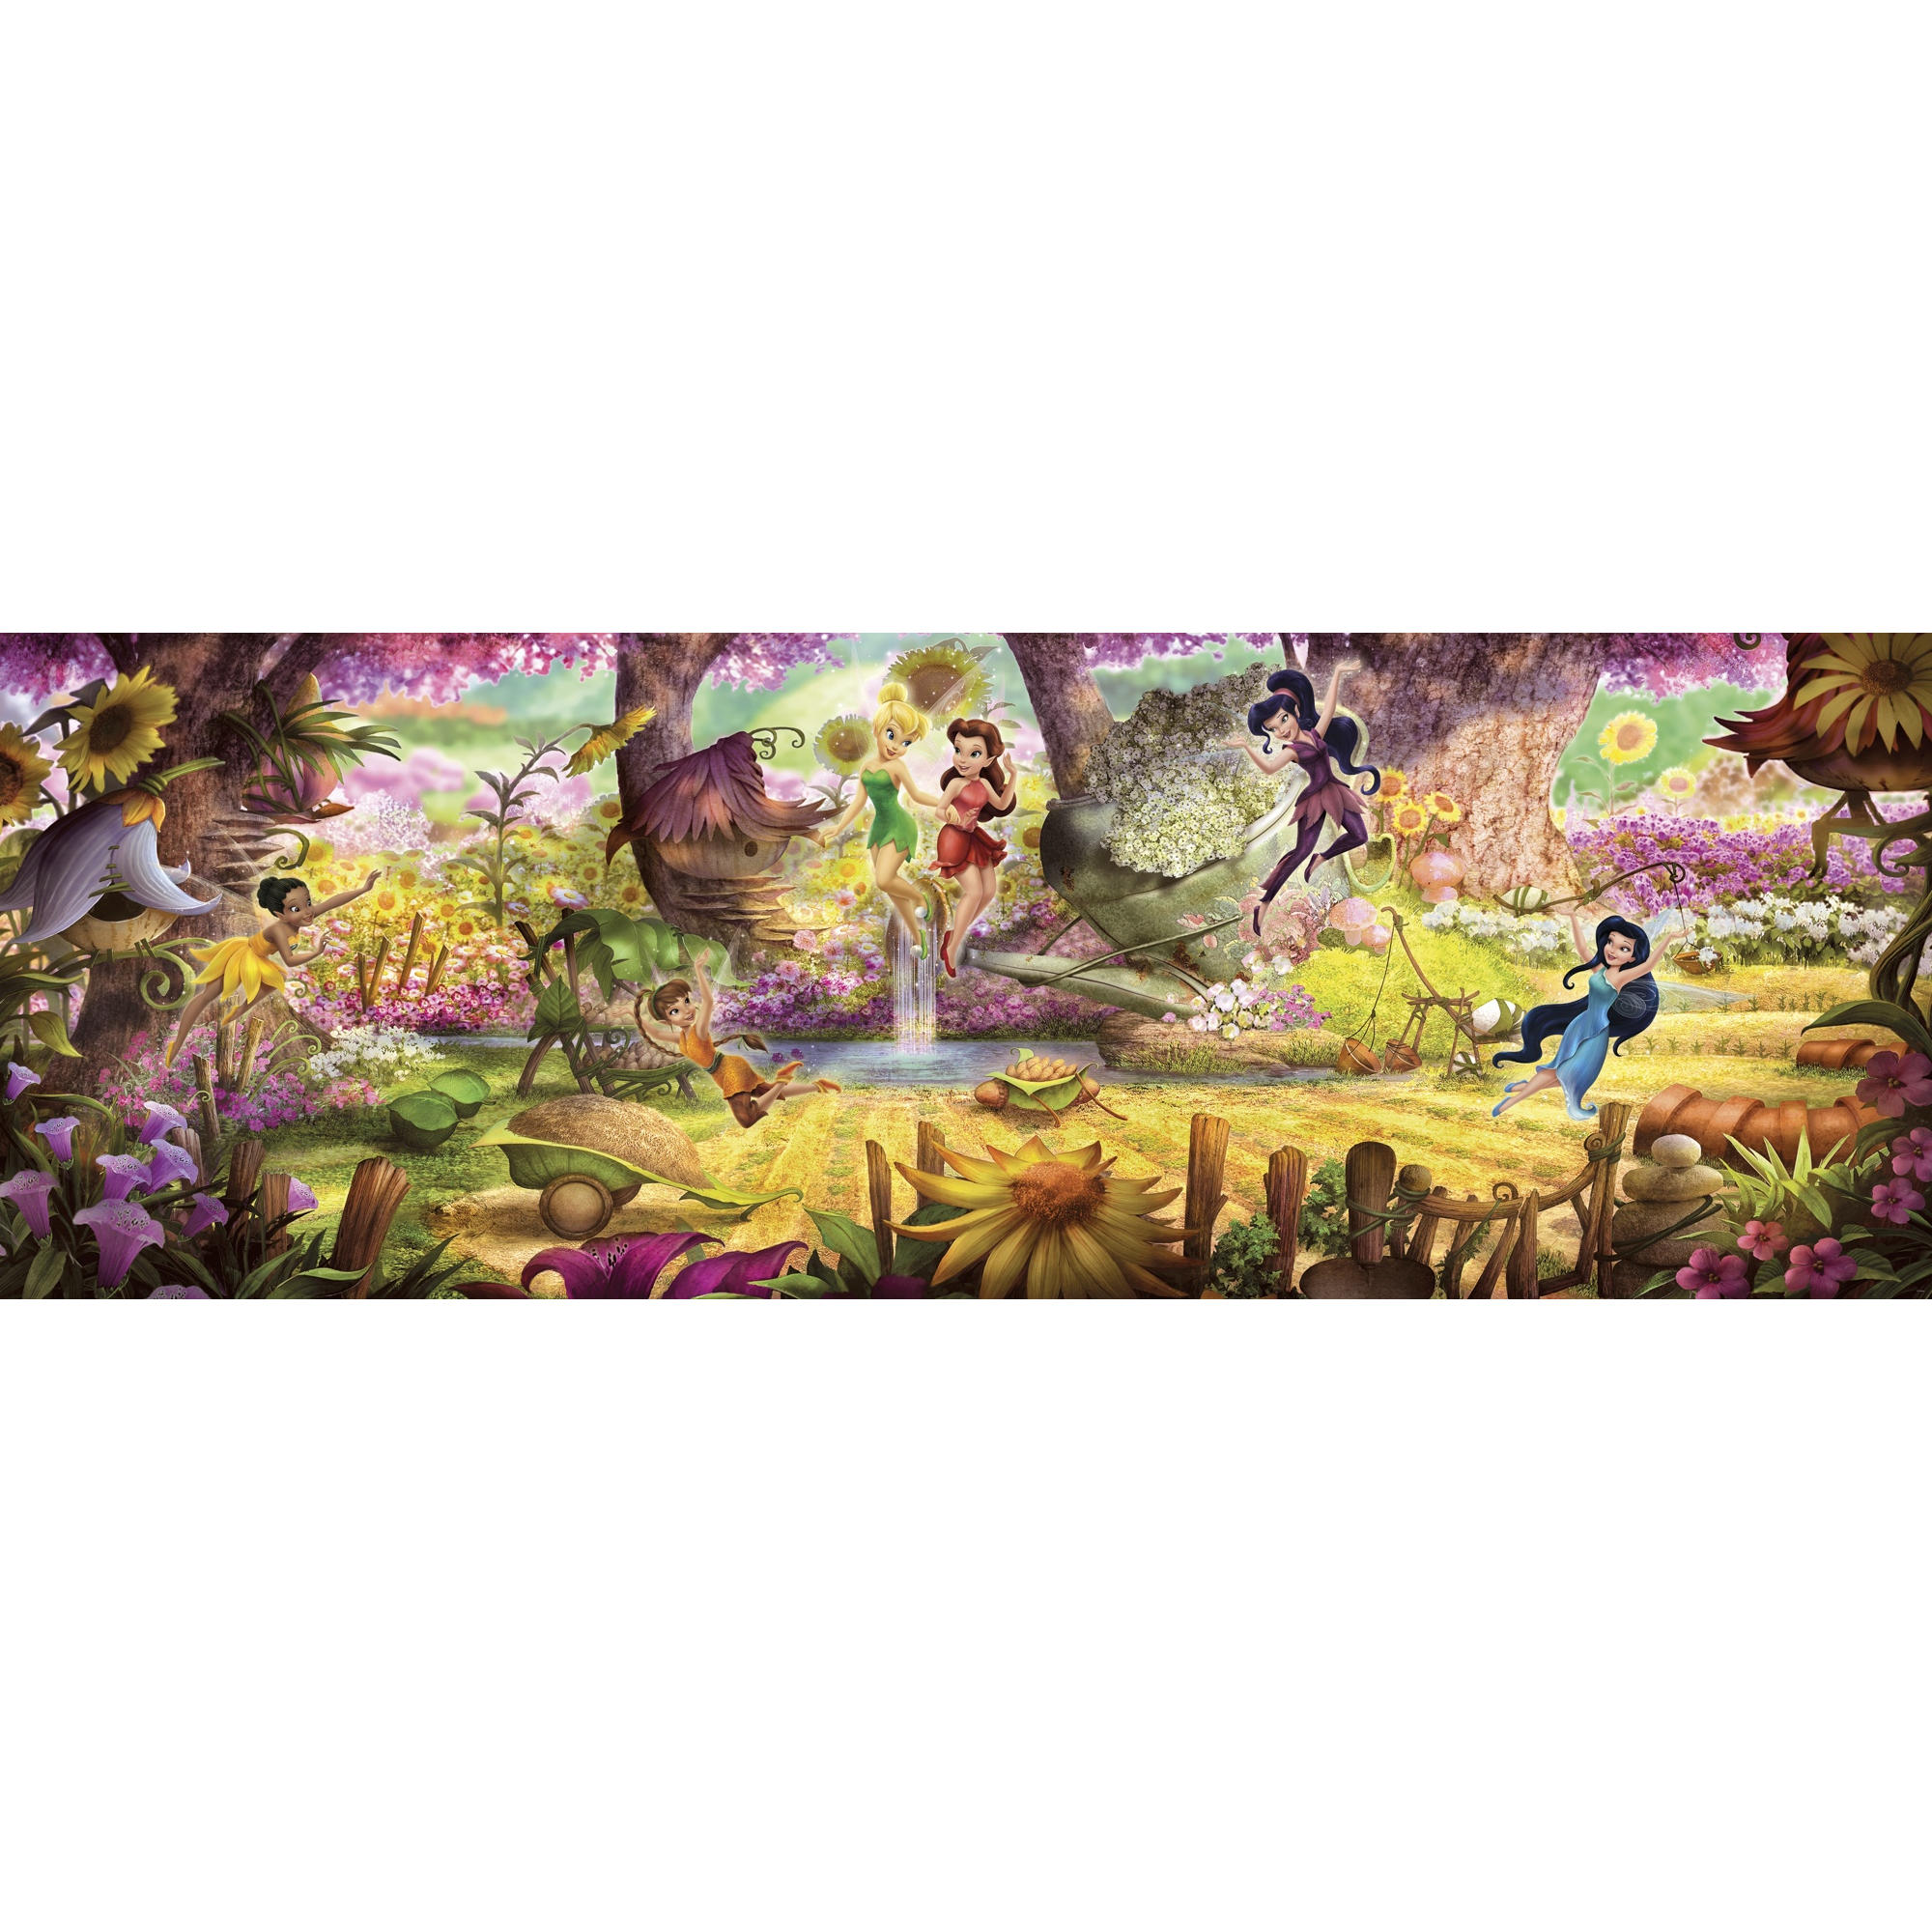 Fototapete 'Fairies Forest' 368 x 127 cm + product picture